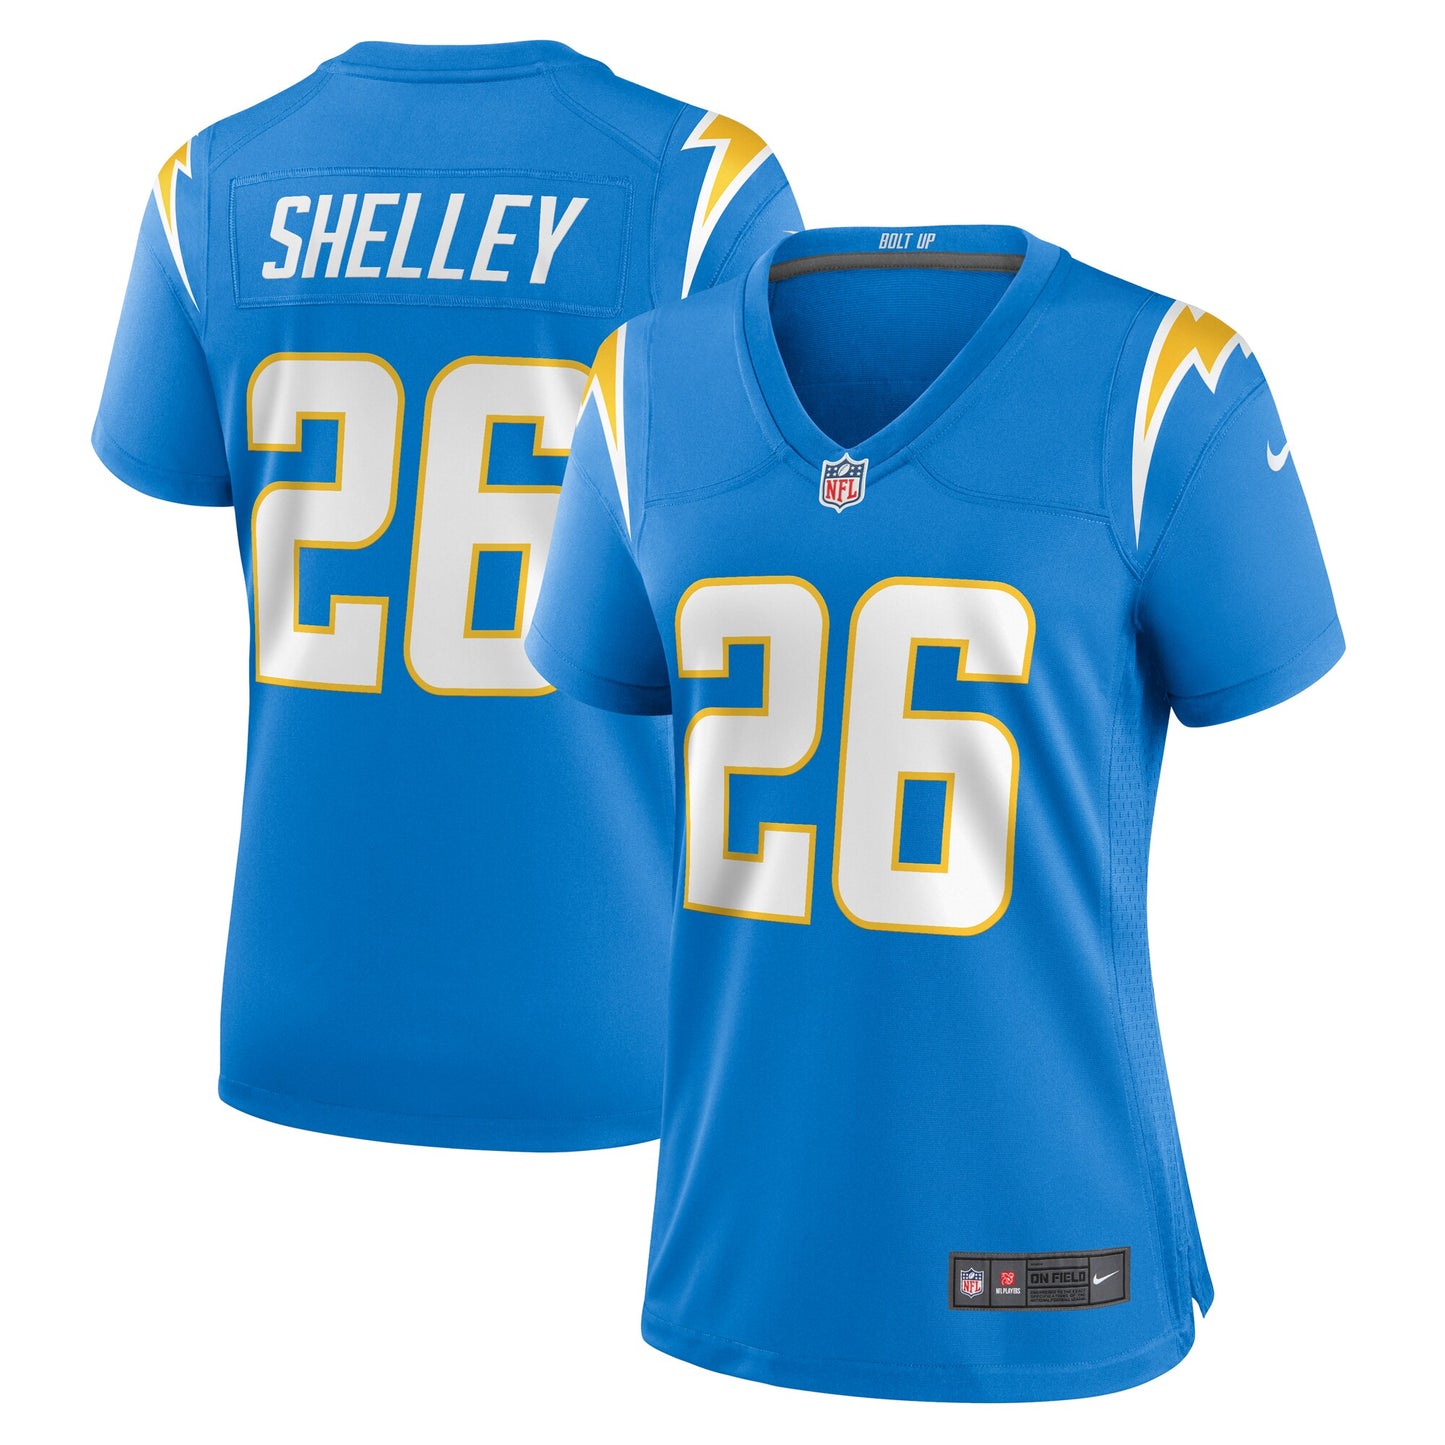 Duke Shelley Los Angeles Chargers Nike Women's Team Game Jersey -  Powder Blue